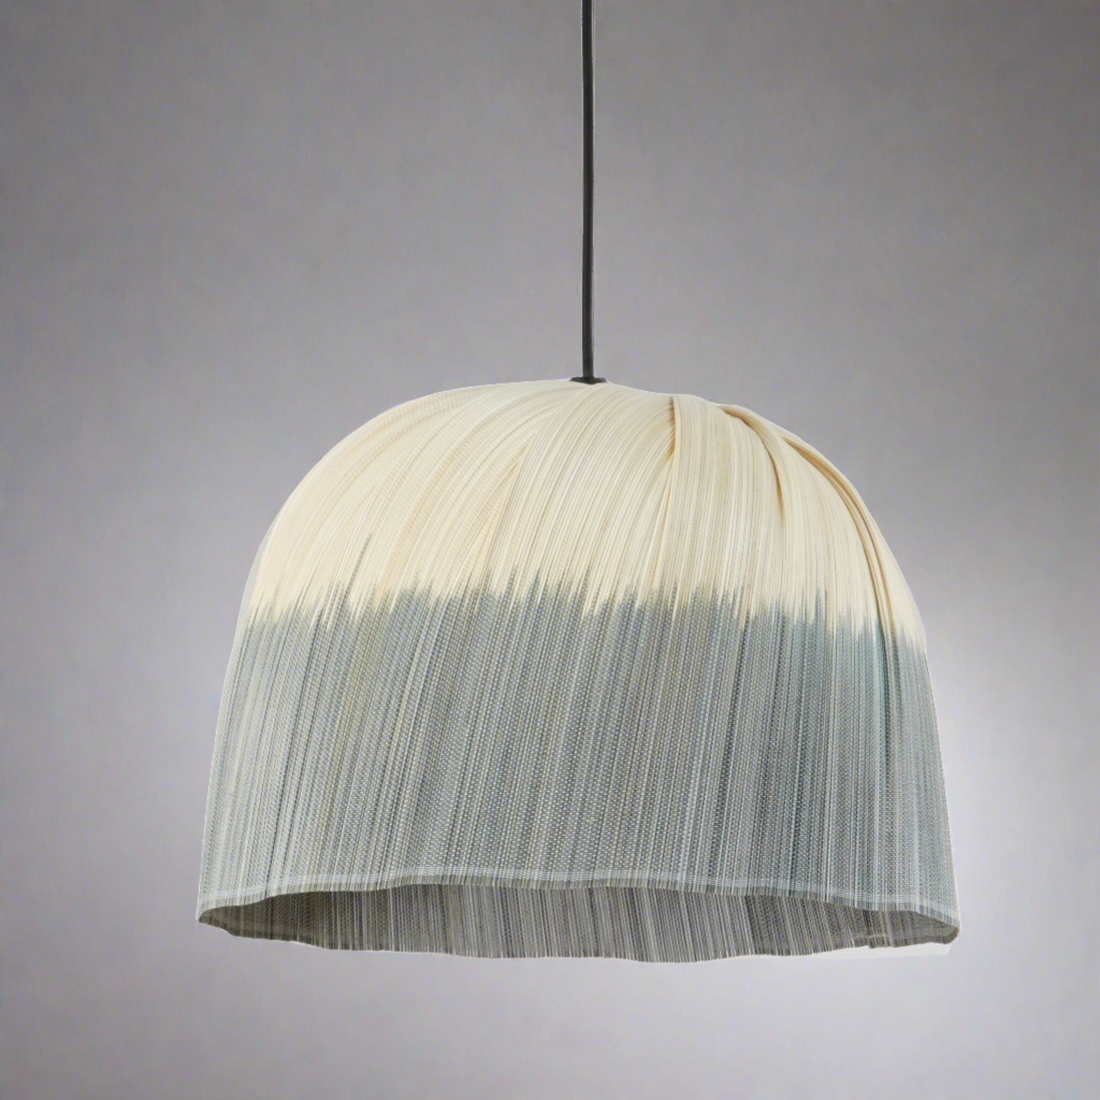 Oceana Seagrass Straw Lampshade Handcrafted, Pendant Lamps, Hanging Ceiling Lights